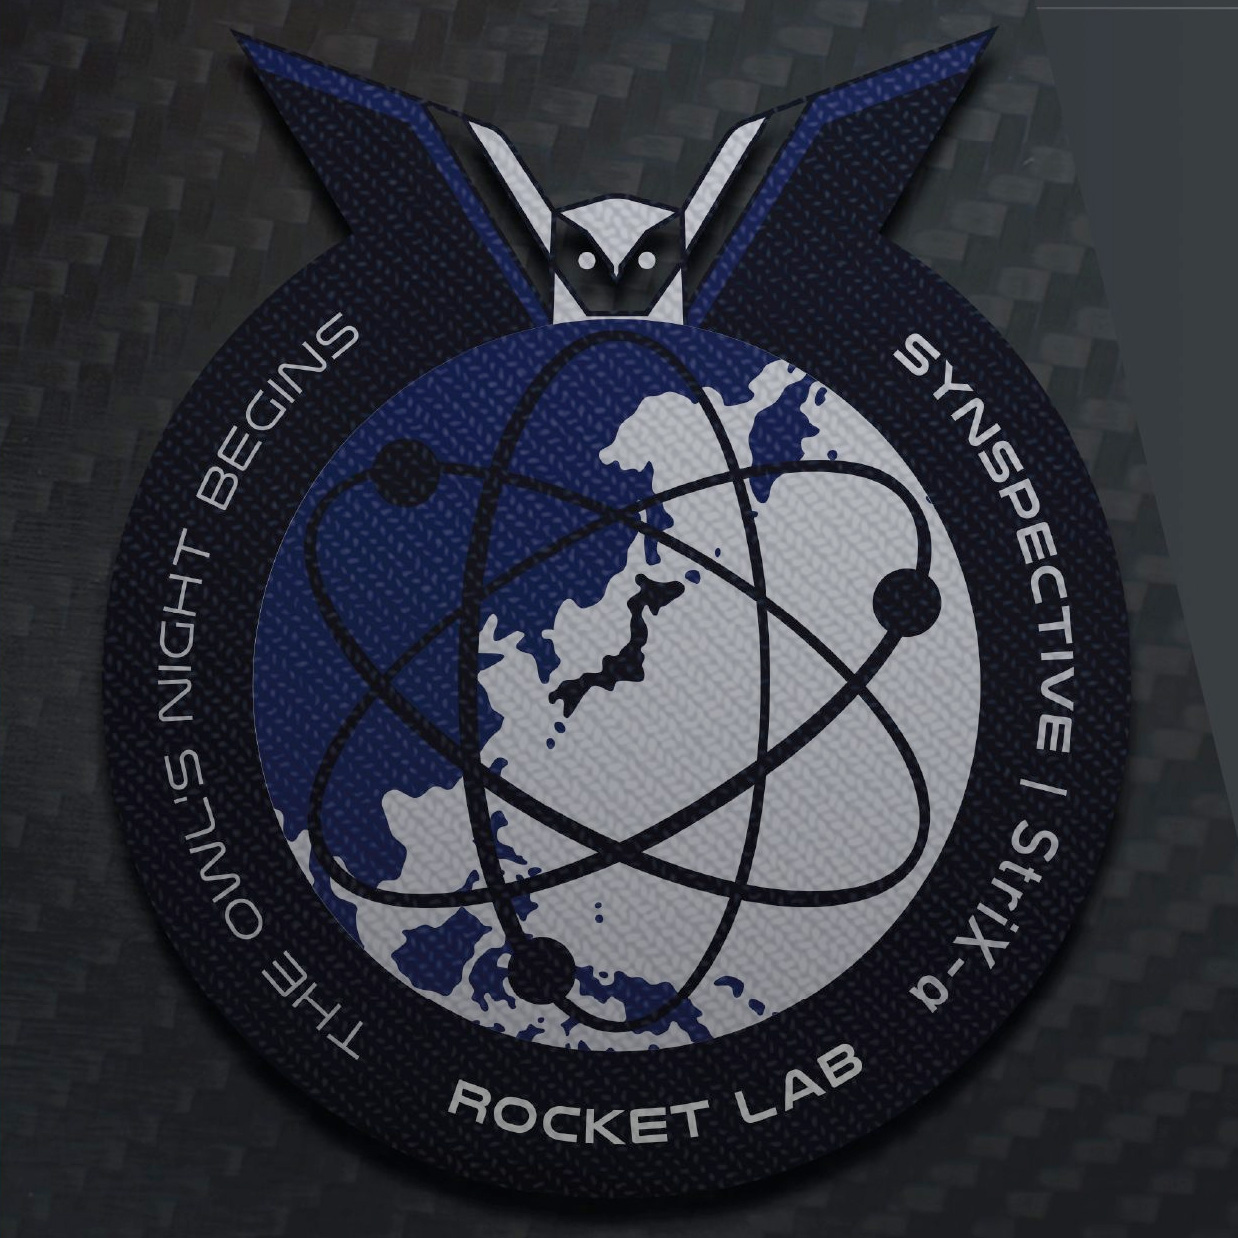 ROCKET LAB 17 DEDICATED SATELLITE Mission SPACE PATCH The Owl's Night Begins 